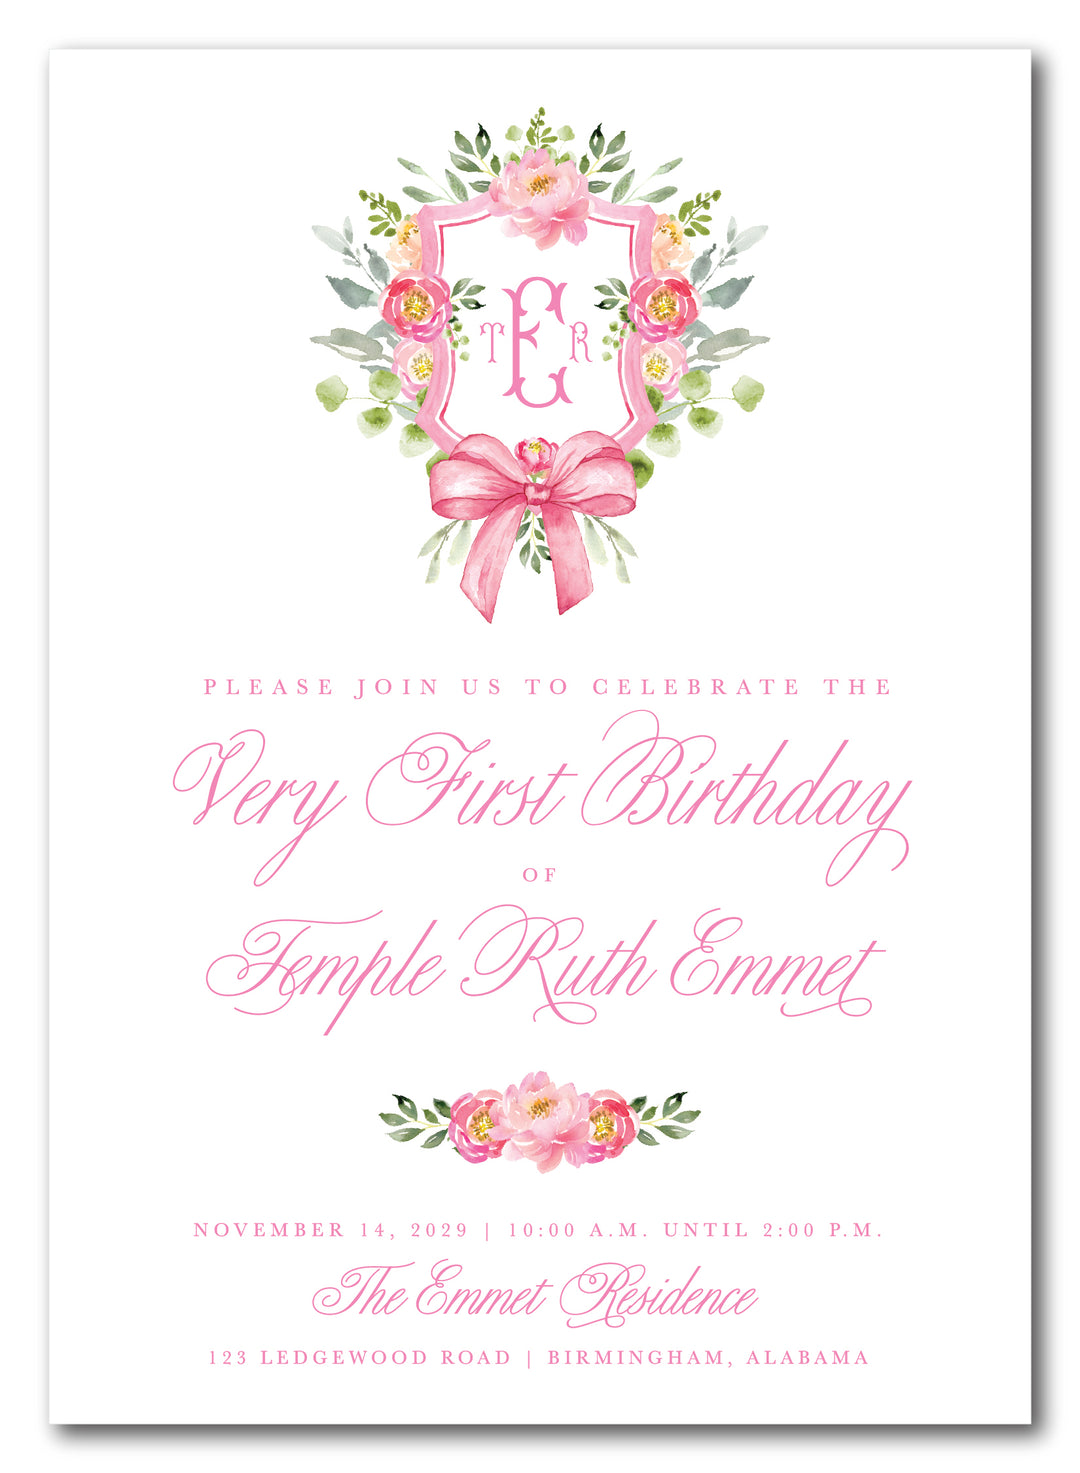 The Floral Crest Birthday Party Invitation